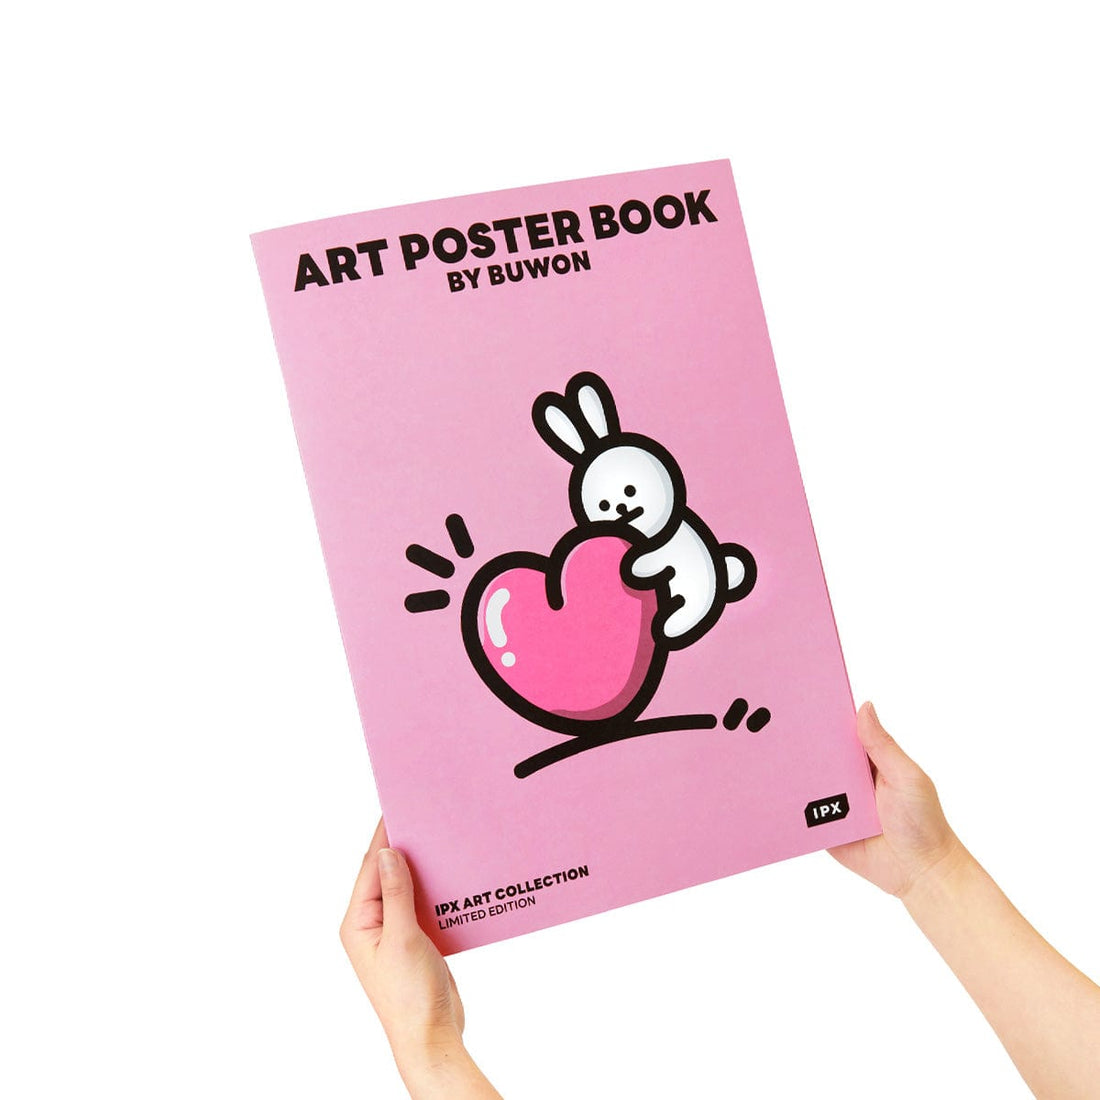 IPX ART TOYS POSTER BOOKLET BUWON B.B.Rabbit POSTER BOOKLET [IPX ART COLLECTION]